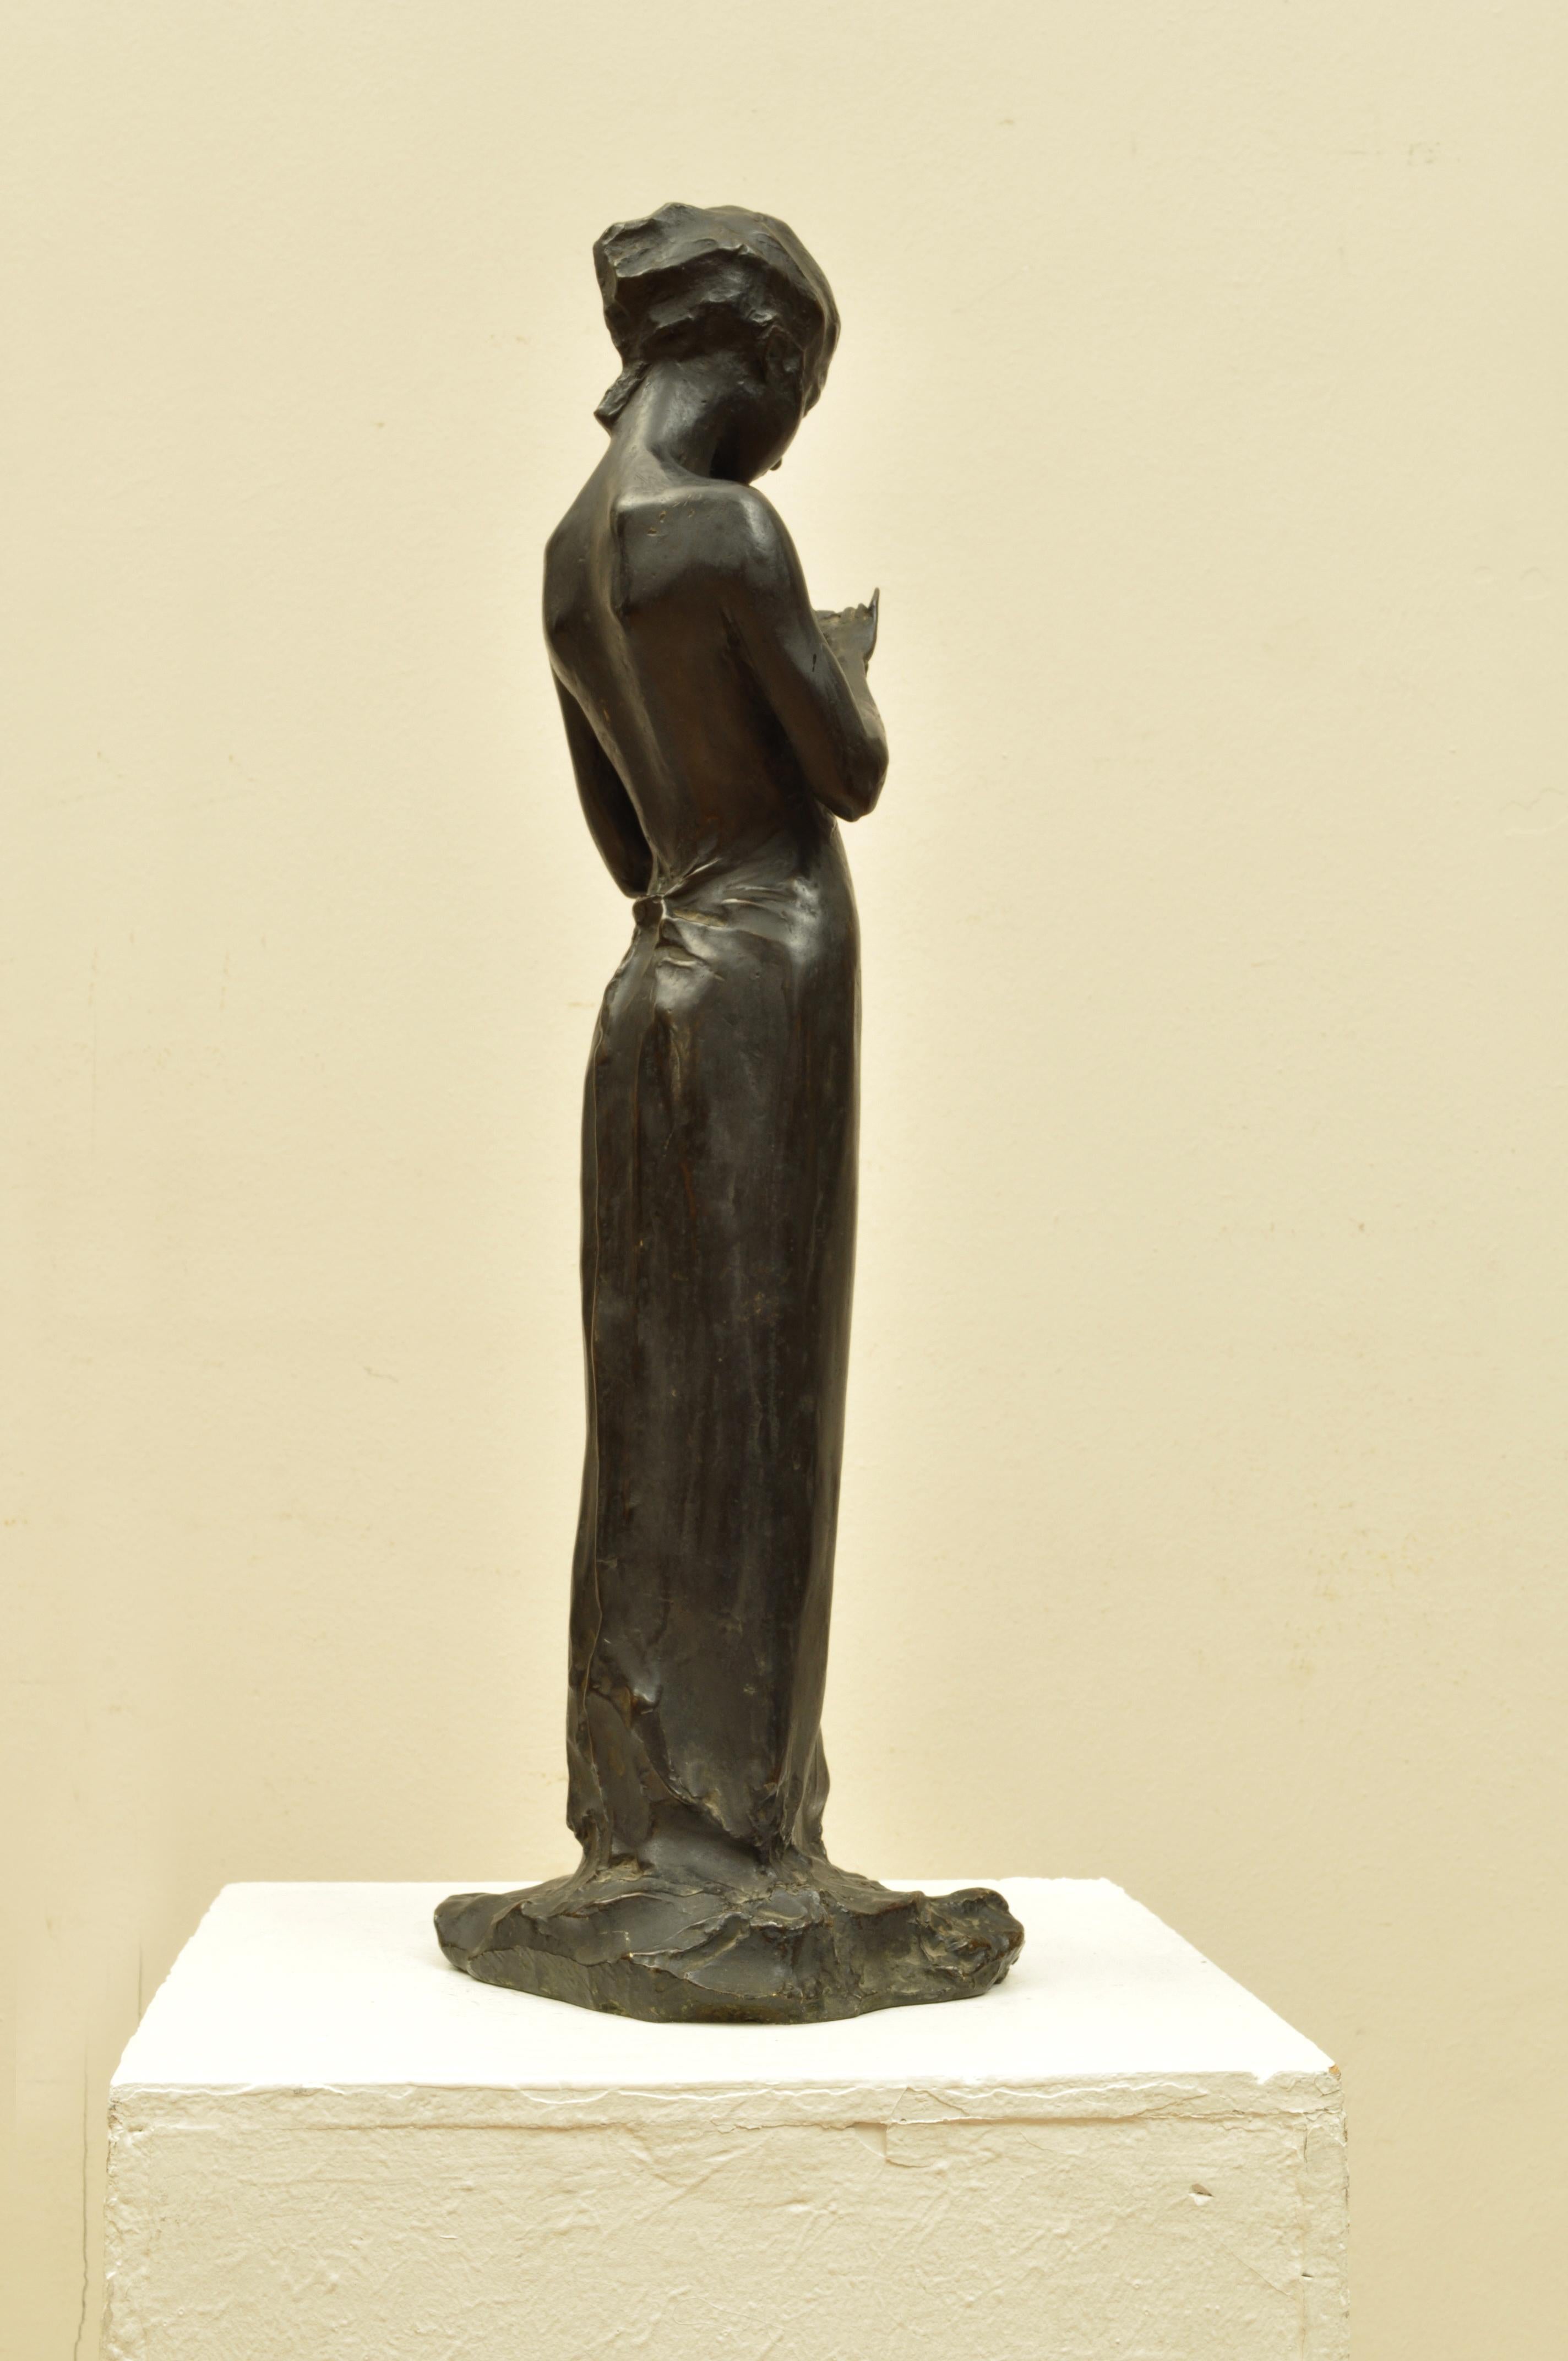 The girl with the braid - Art Deco Sculpture by Prince Paul Troubetzkoy